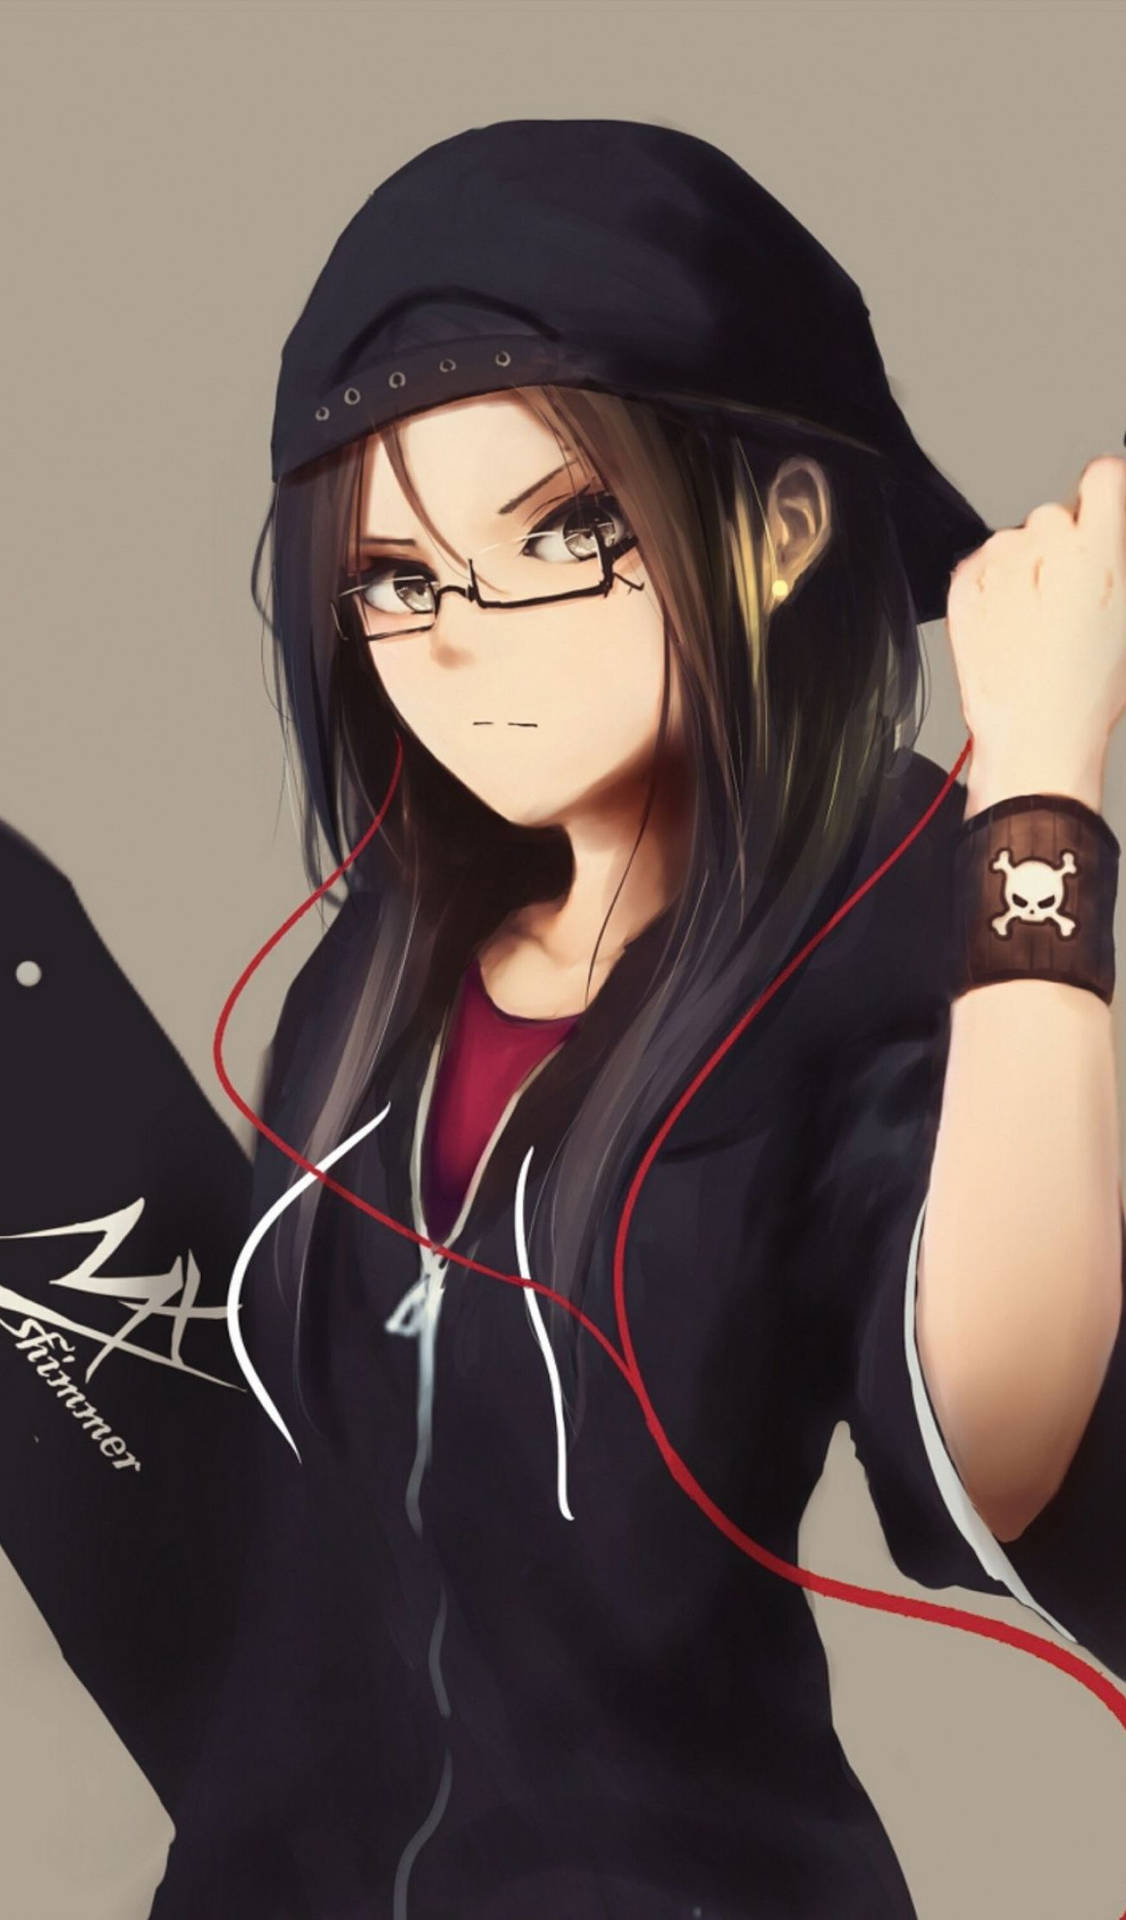 Cute Anime Girl with Glasses : r/wallpapers